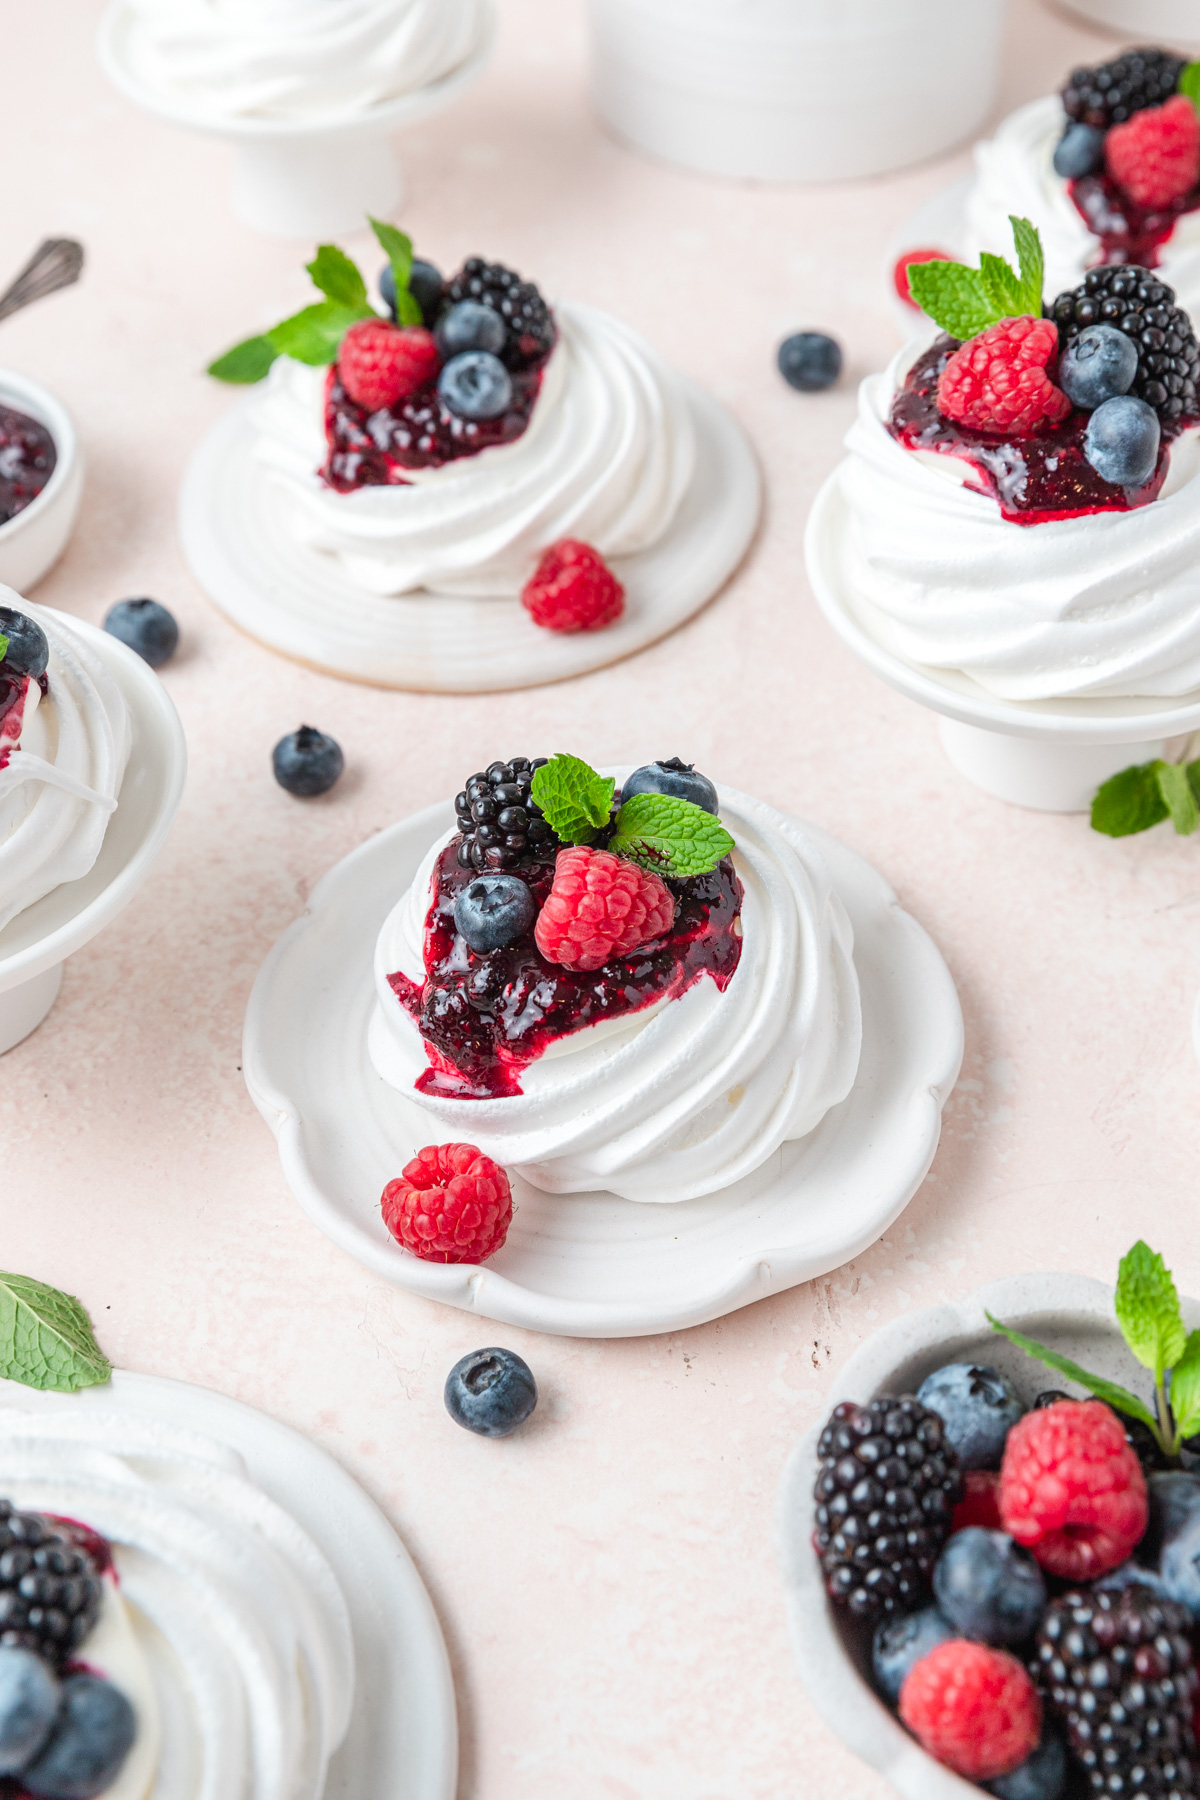 mini meringue nests with berries and whipped cream.